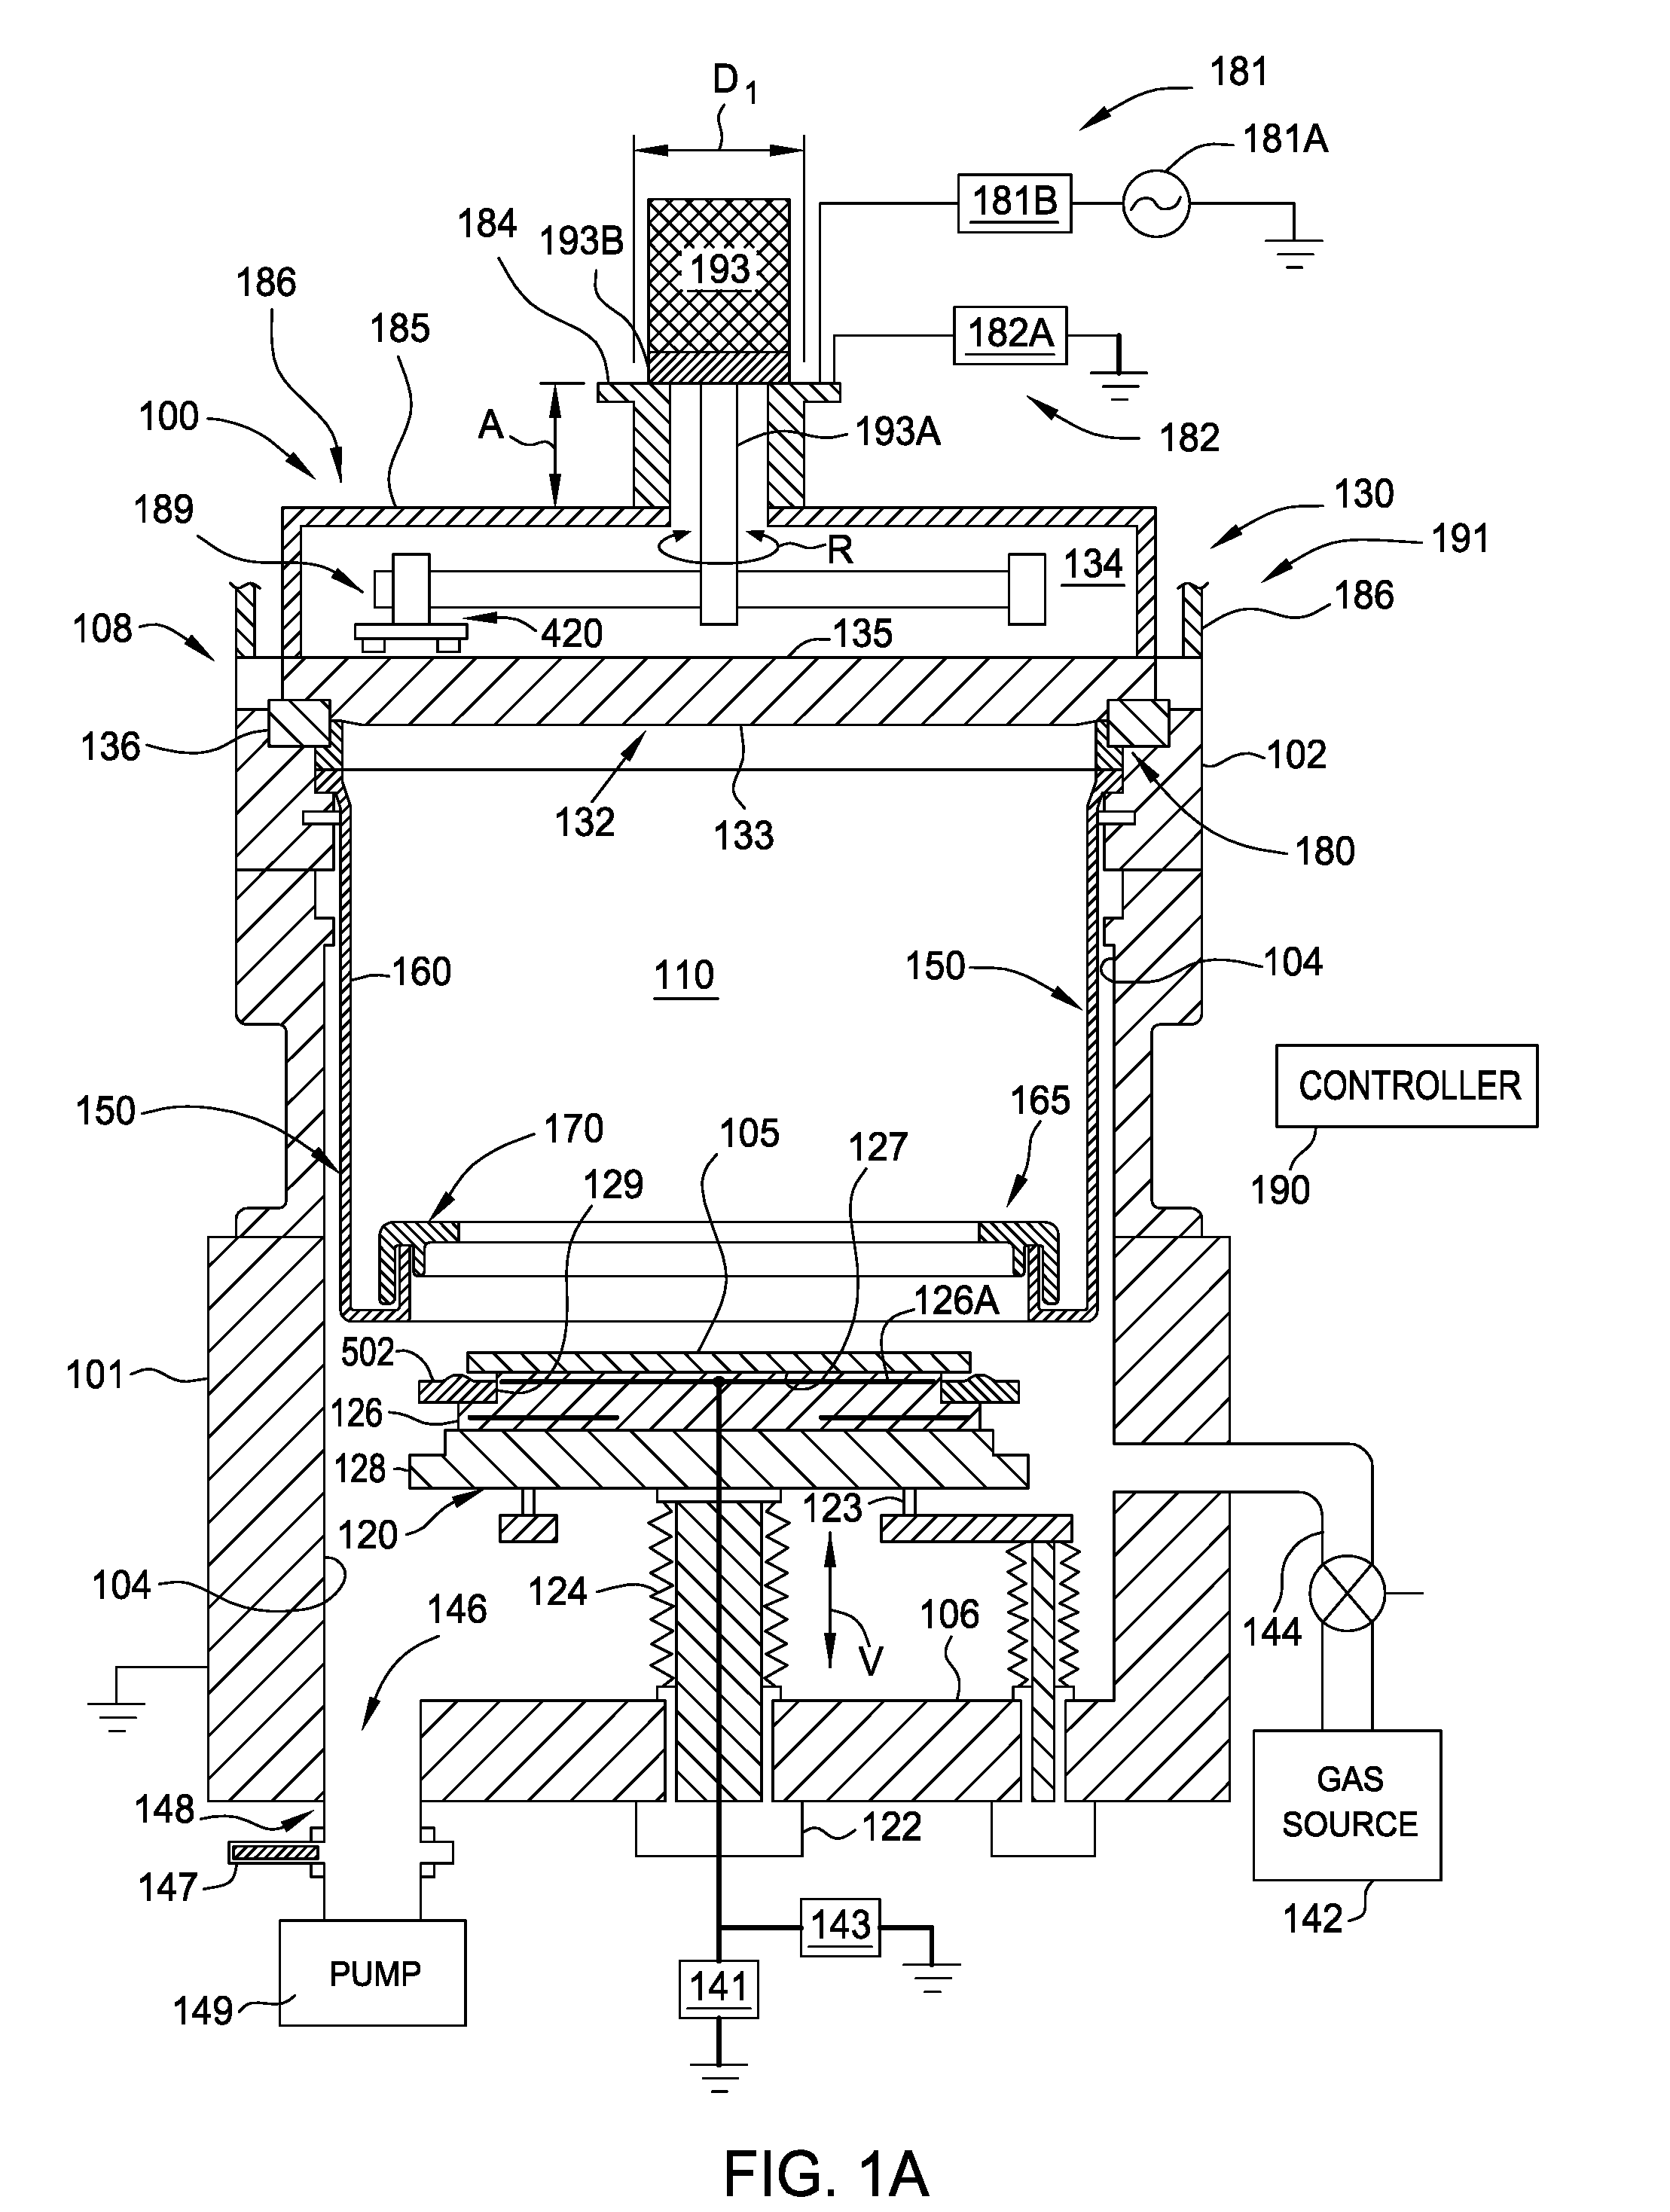 High pressure rf-dc sputtering and methods to improve film uniformity and step-coverage of this process